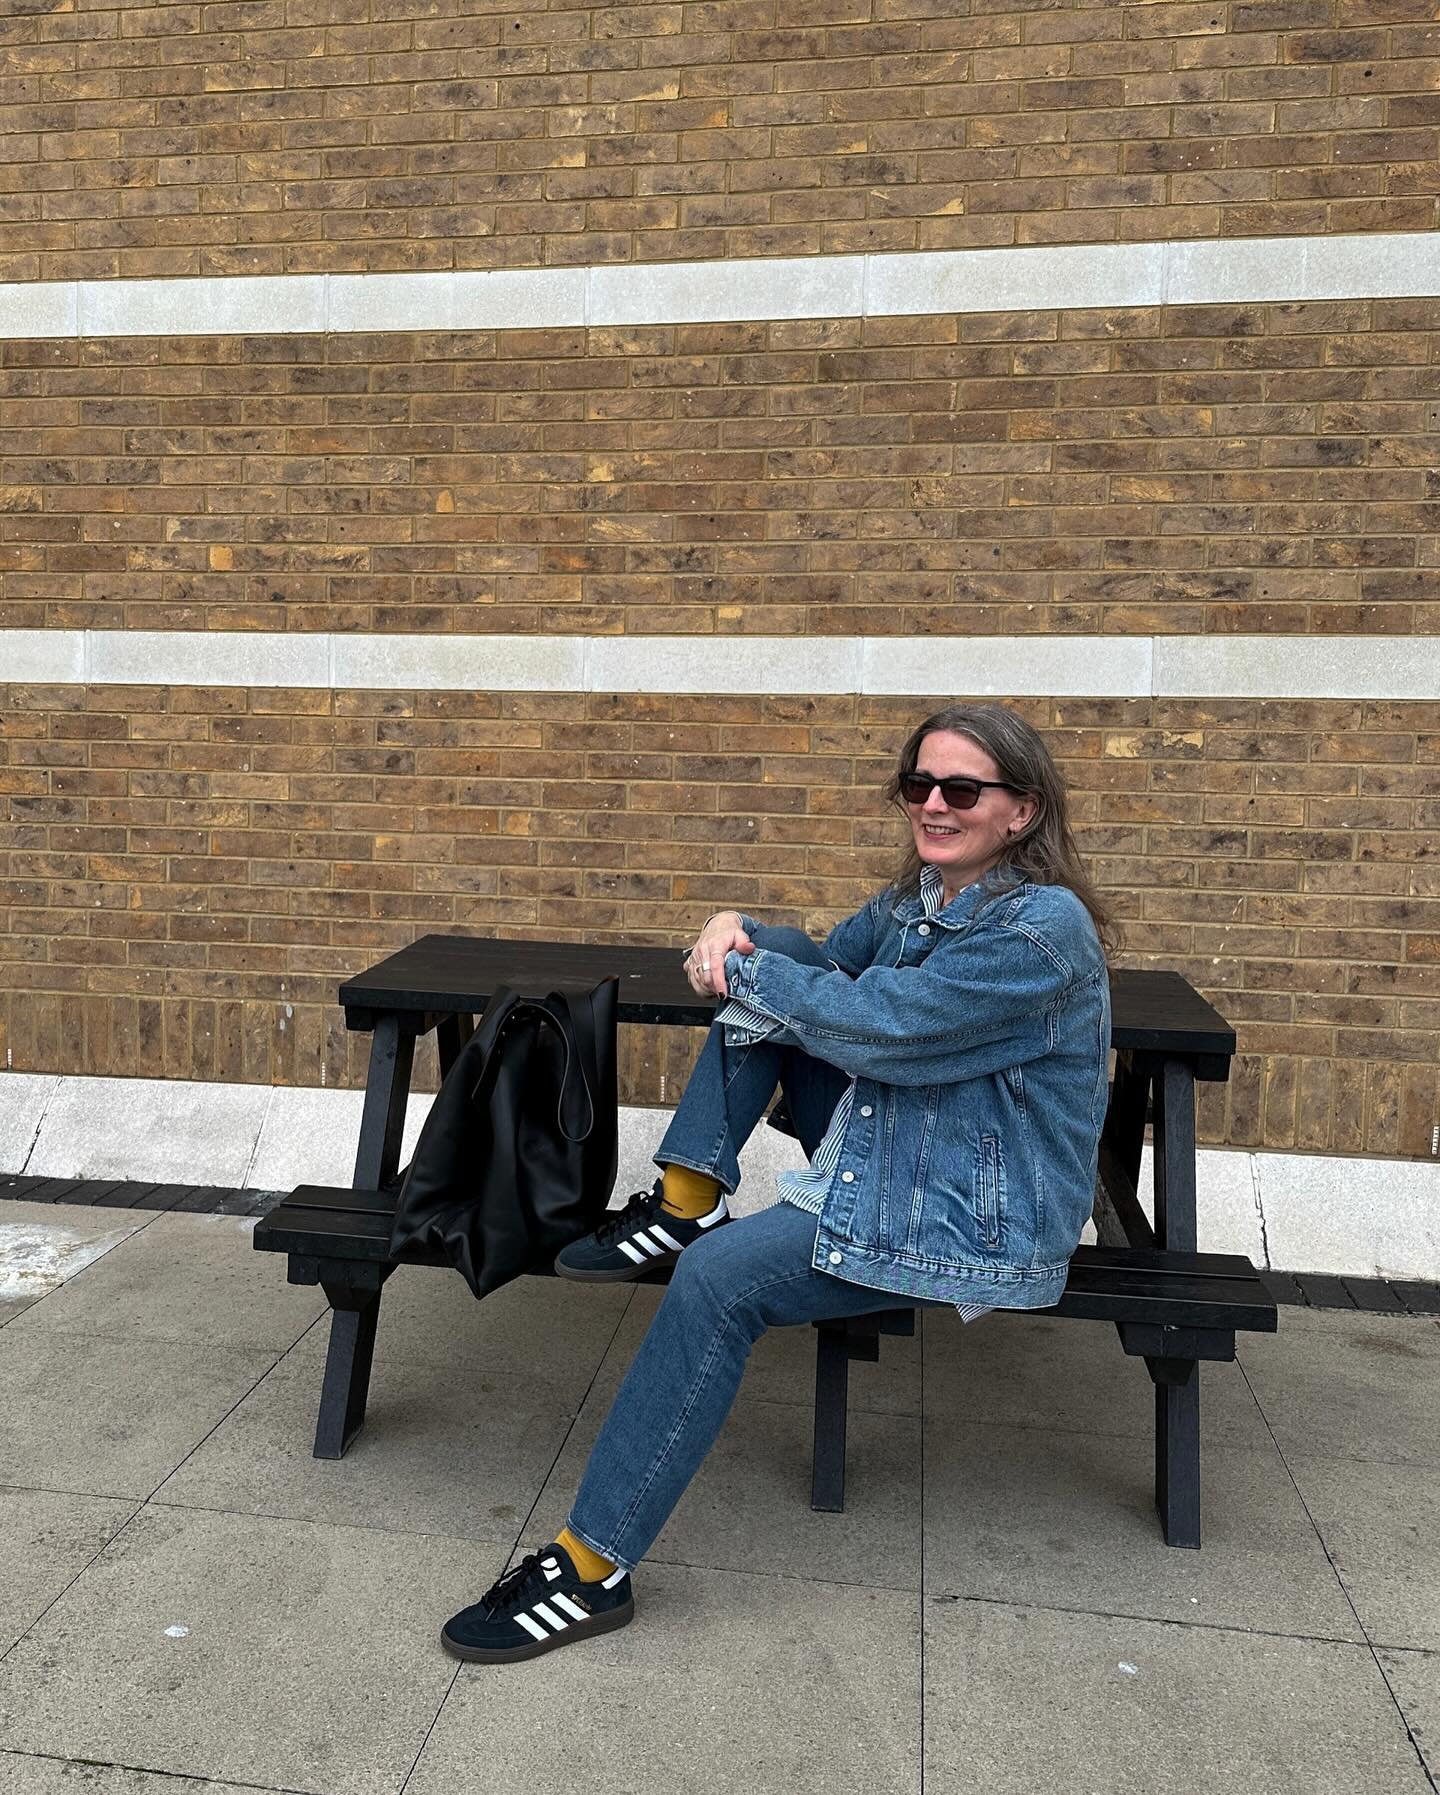 Double denim again&hellip; the striped shirt and bumblebee footwear made it feel more doable 🐝  The style experiments continue! 
- Details 🔝 in April links
.
.
.
#doubledenim #everydayoutfits #popofcolour #denimstyle #oversizedjacket #springoutfiti